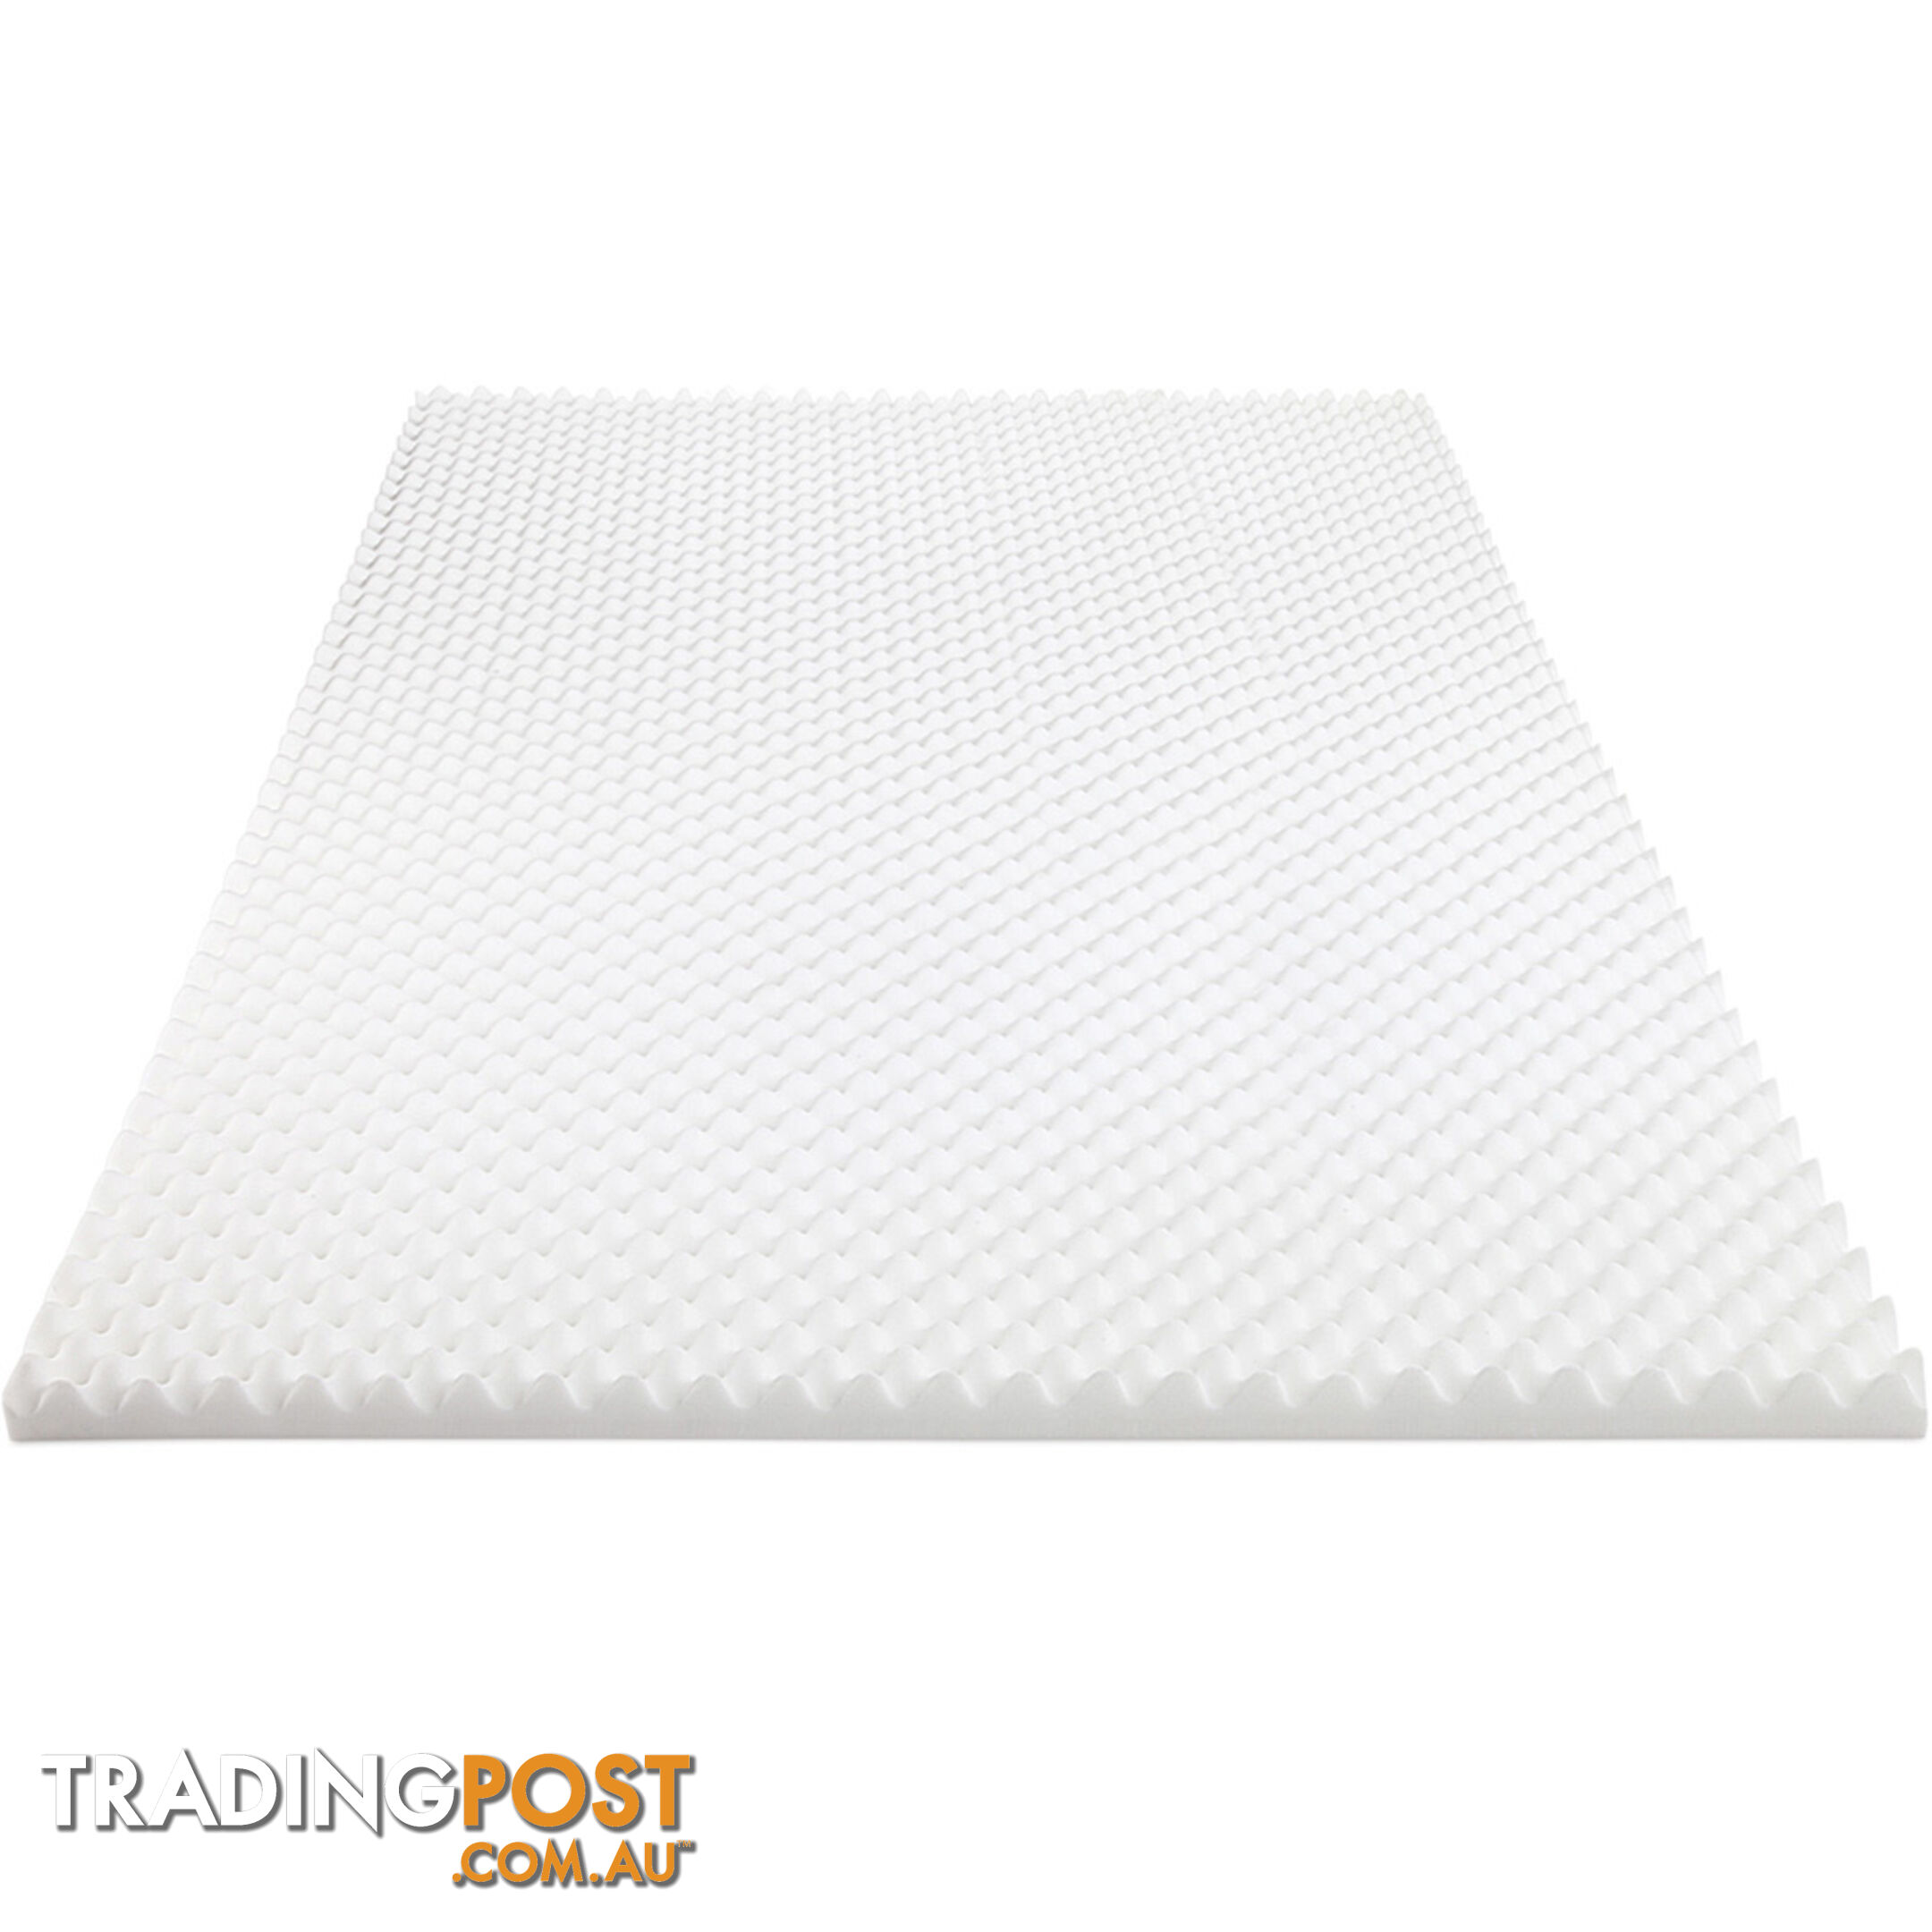 Premium 5cm Egg Crate Mattress Topper Anti-bacterial Underlay Protector Double